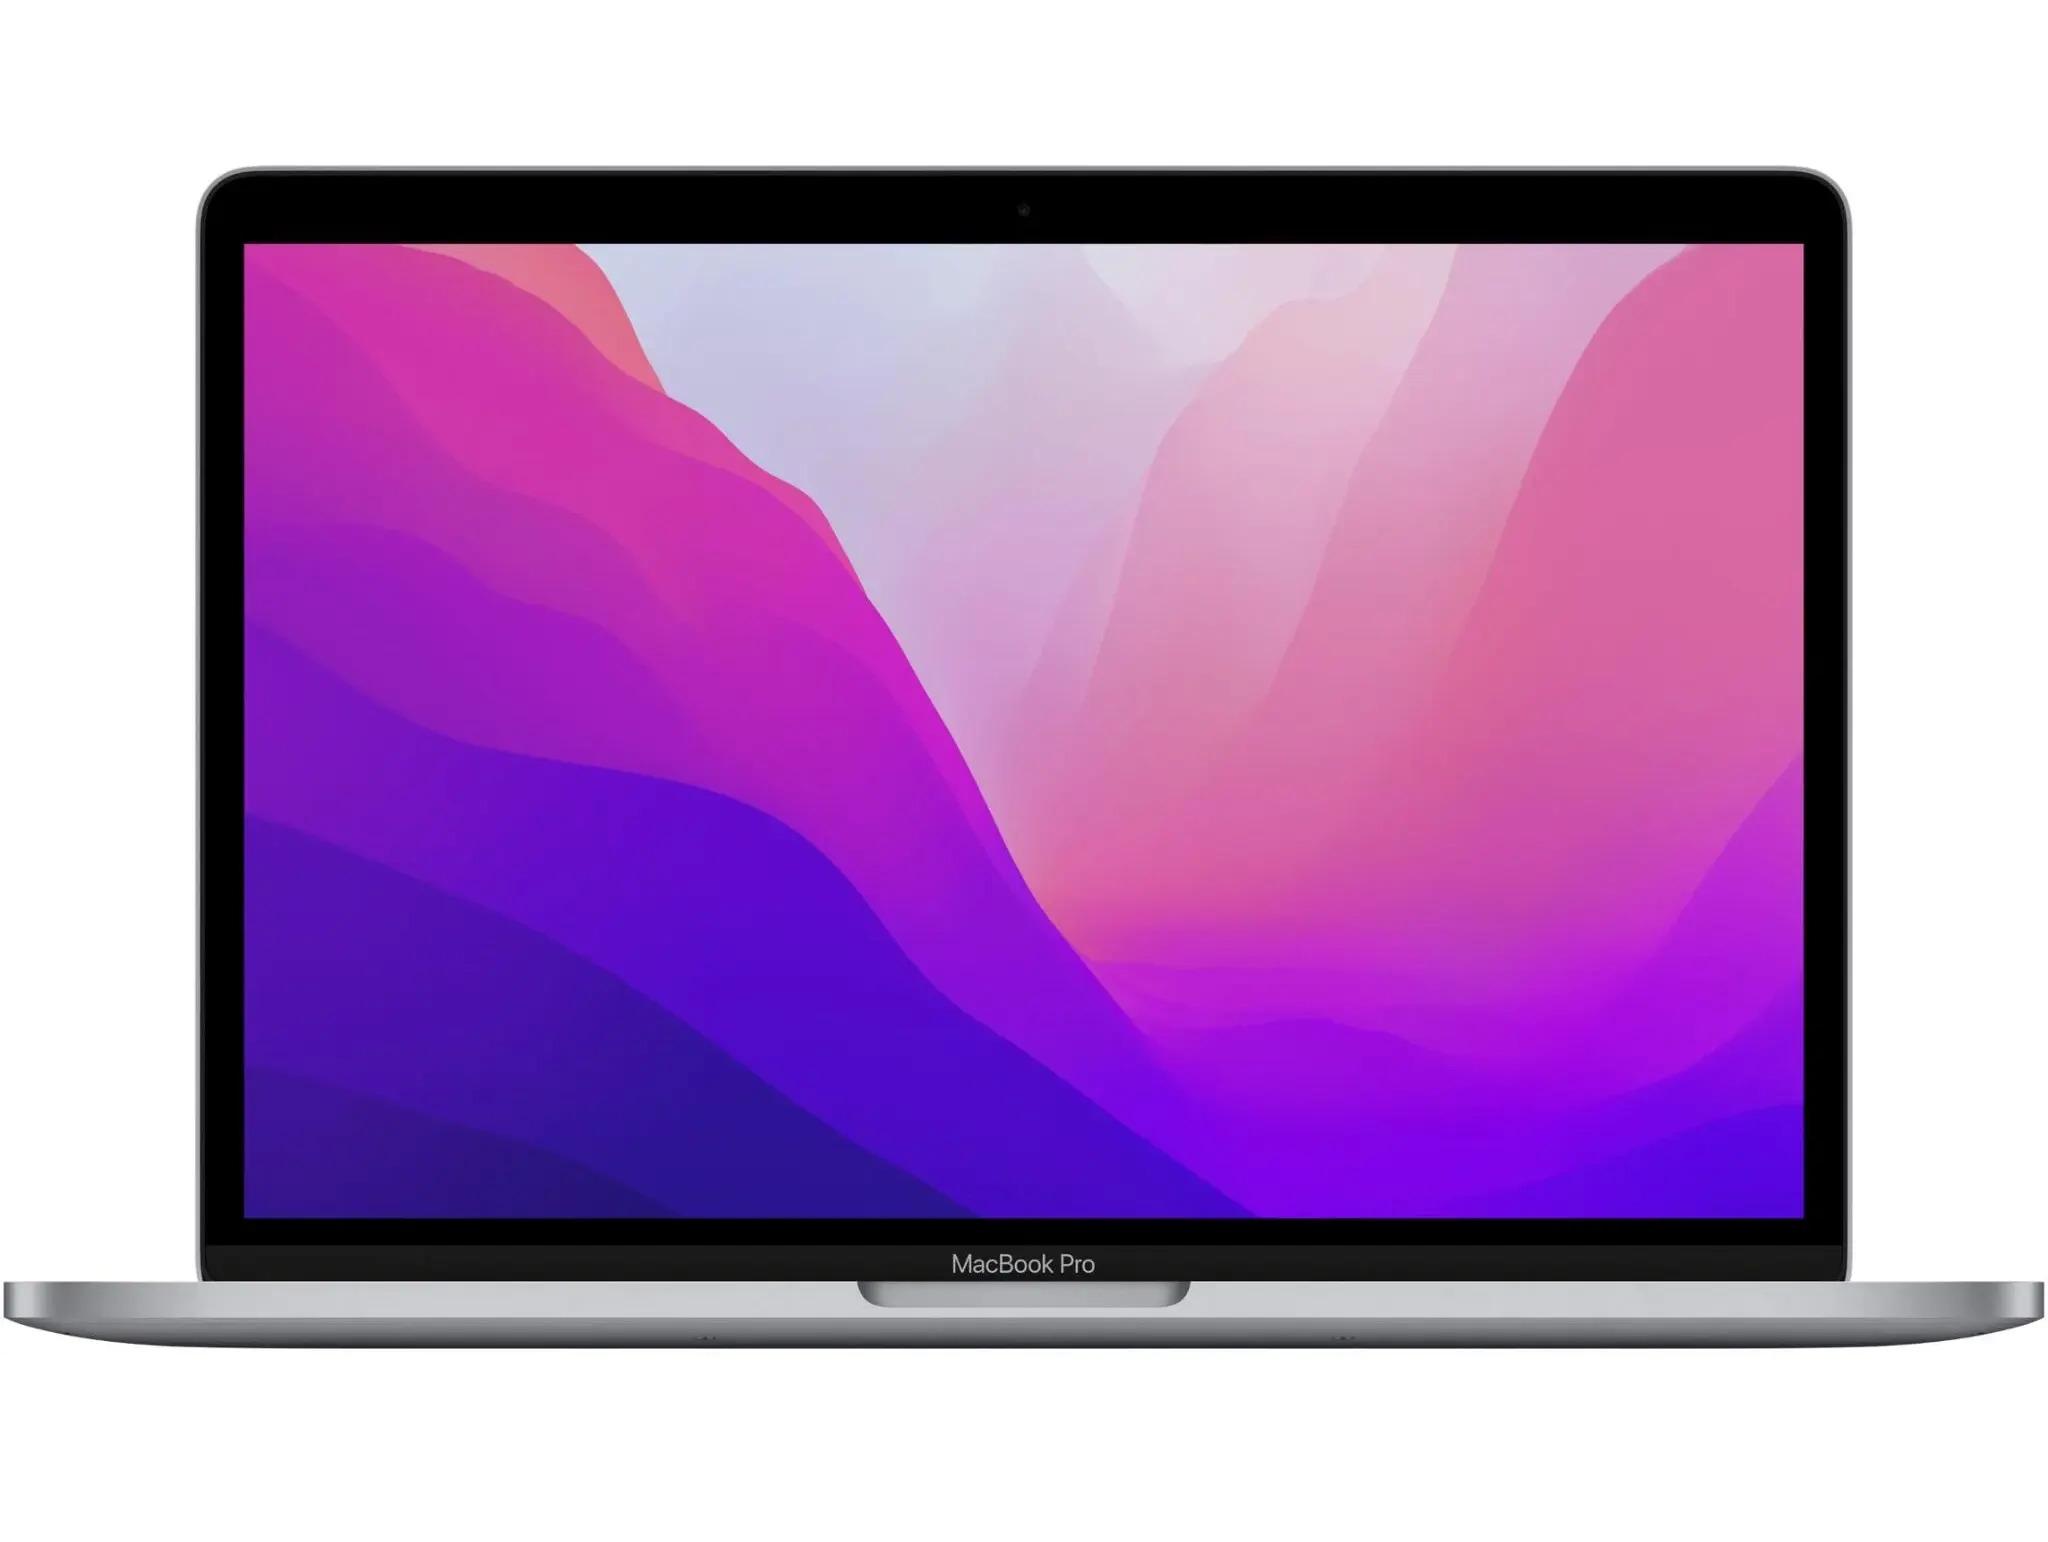 Apple MacBook Pro 13.3in MYD92LLA Notebook Laptop for $999.99 Shipped